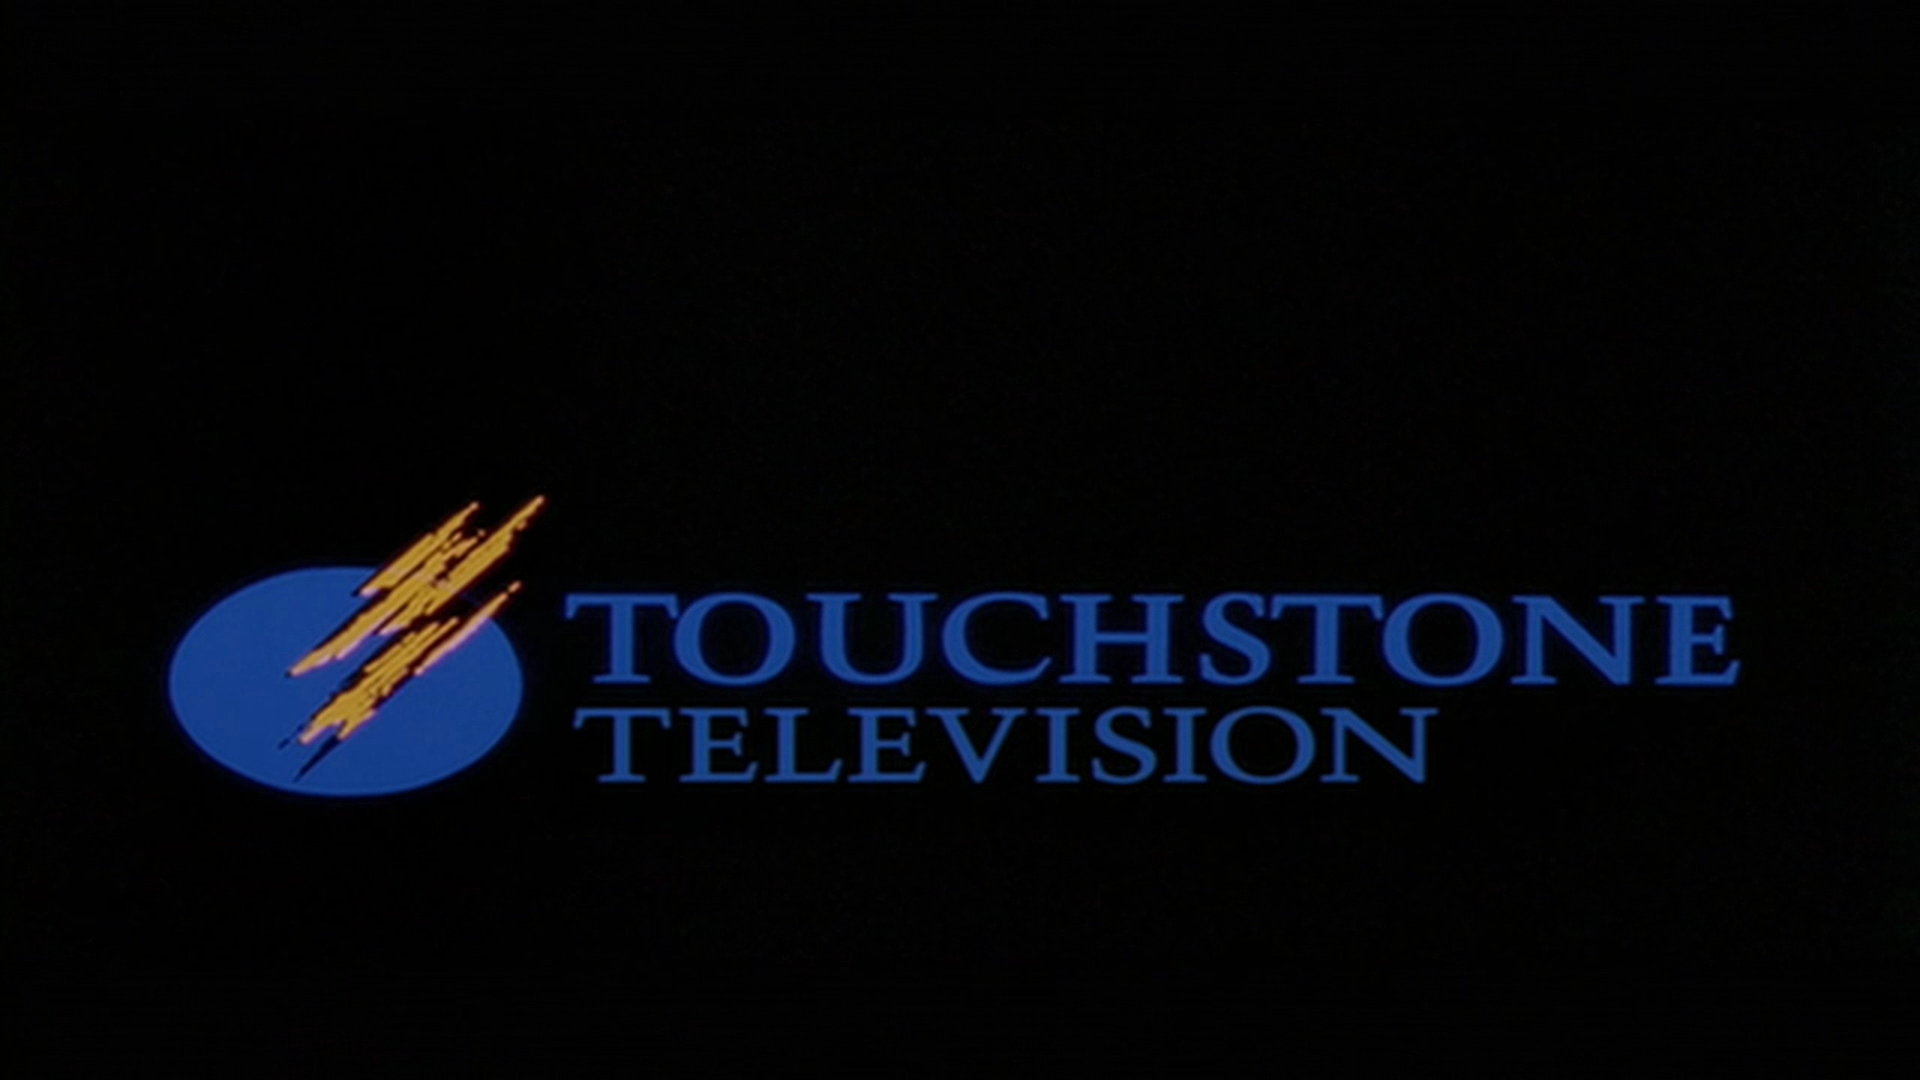 Touchstone Television (2002) (Letterboxed-Stretched) (HD)